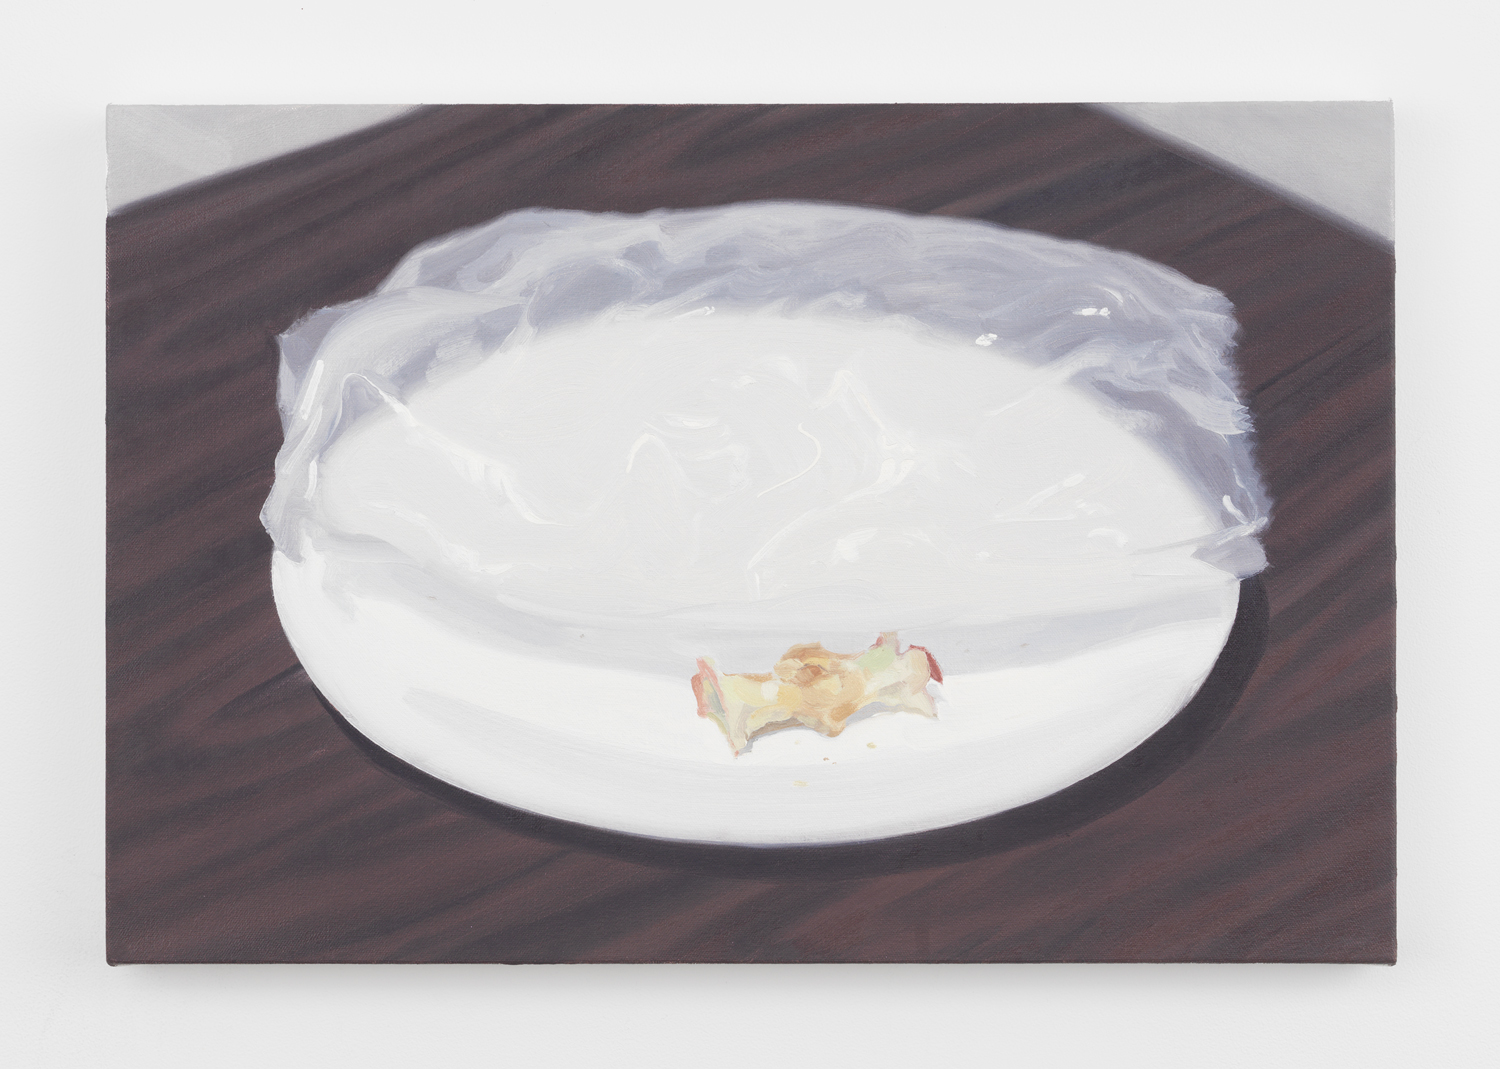 Nathaniel Robinson, Untitled, 2020, Oil on Canvas, 16h x 24w in.